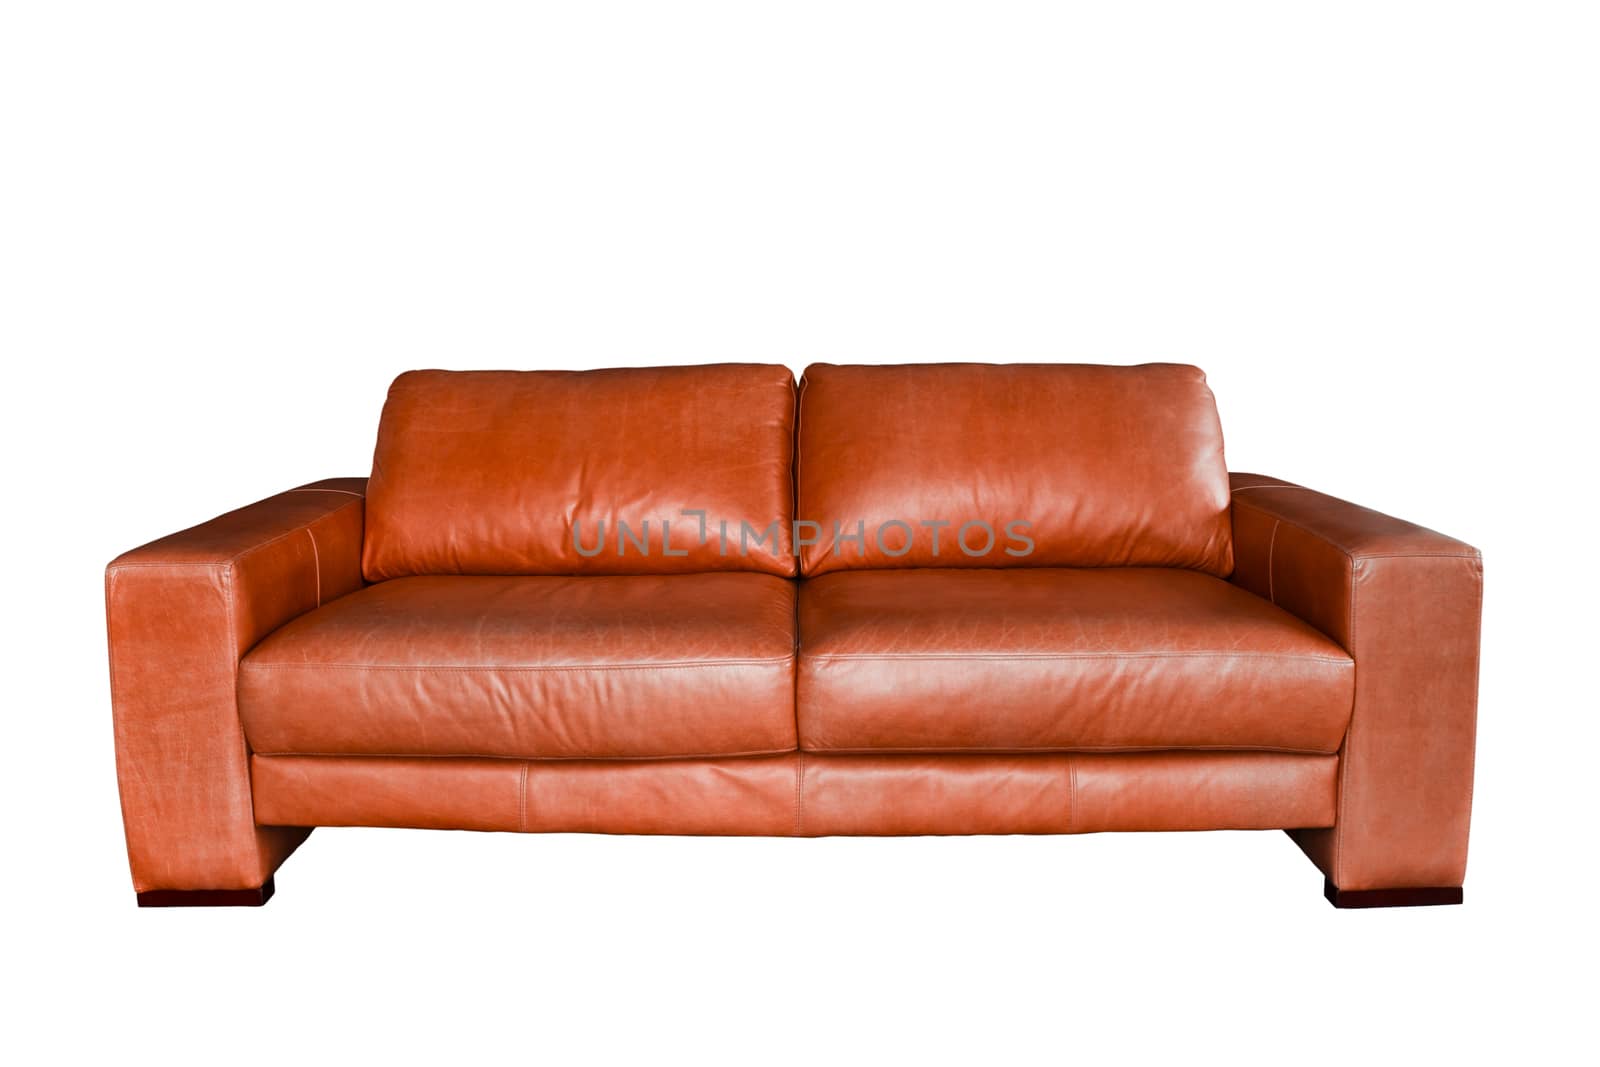 brown leather sofa isolated in white background